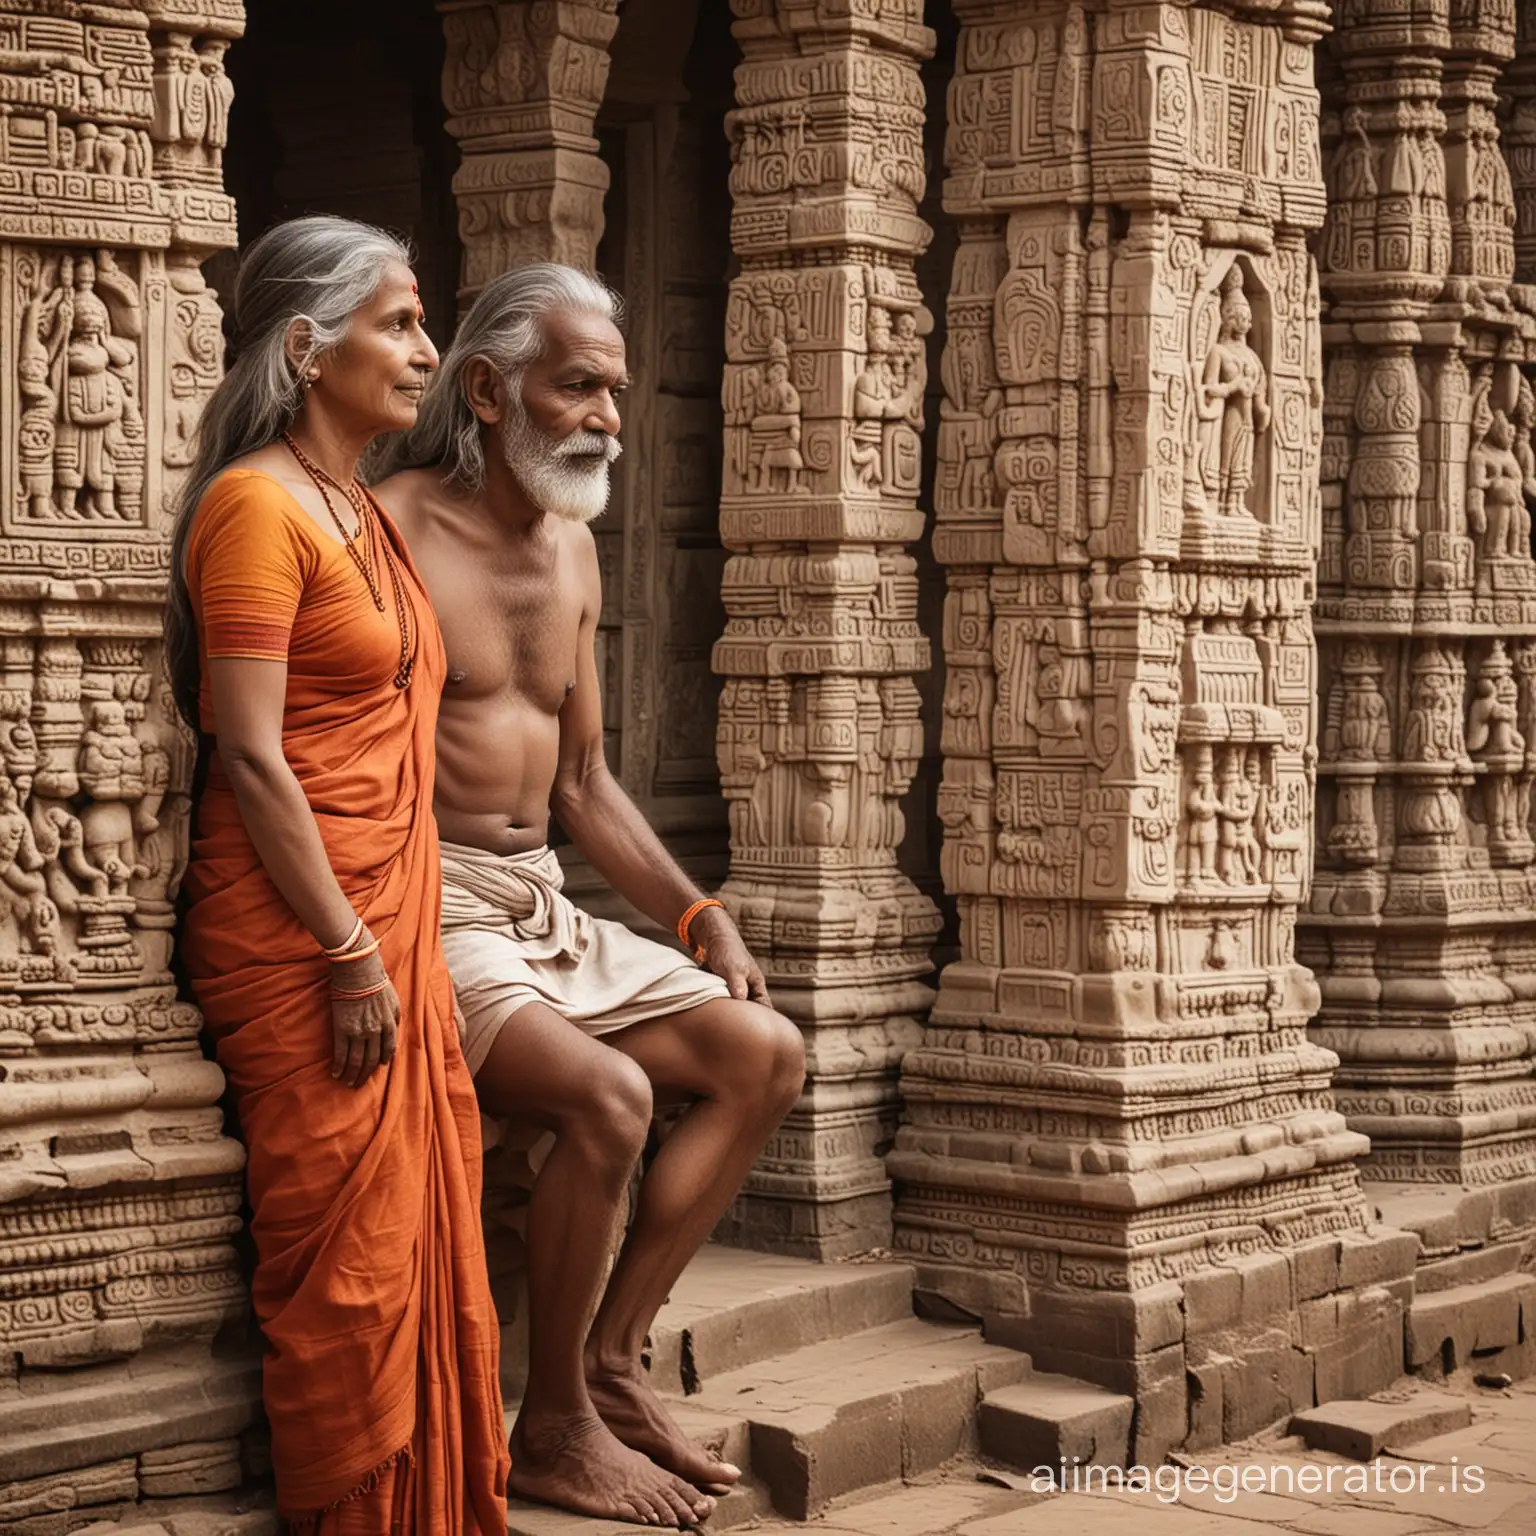 Elderly-Indian-Couple-in-Devotional-Reverence-at-Temple